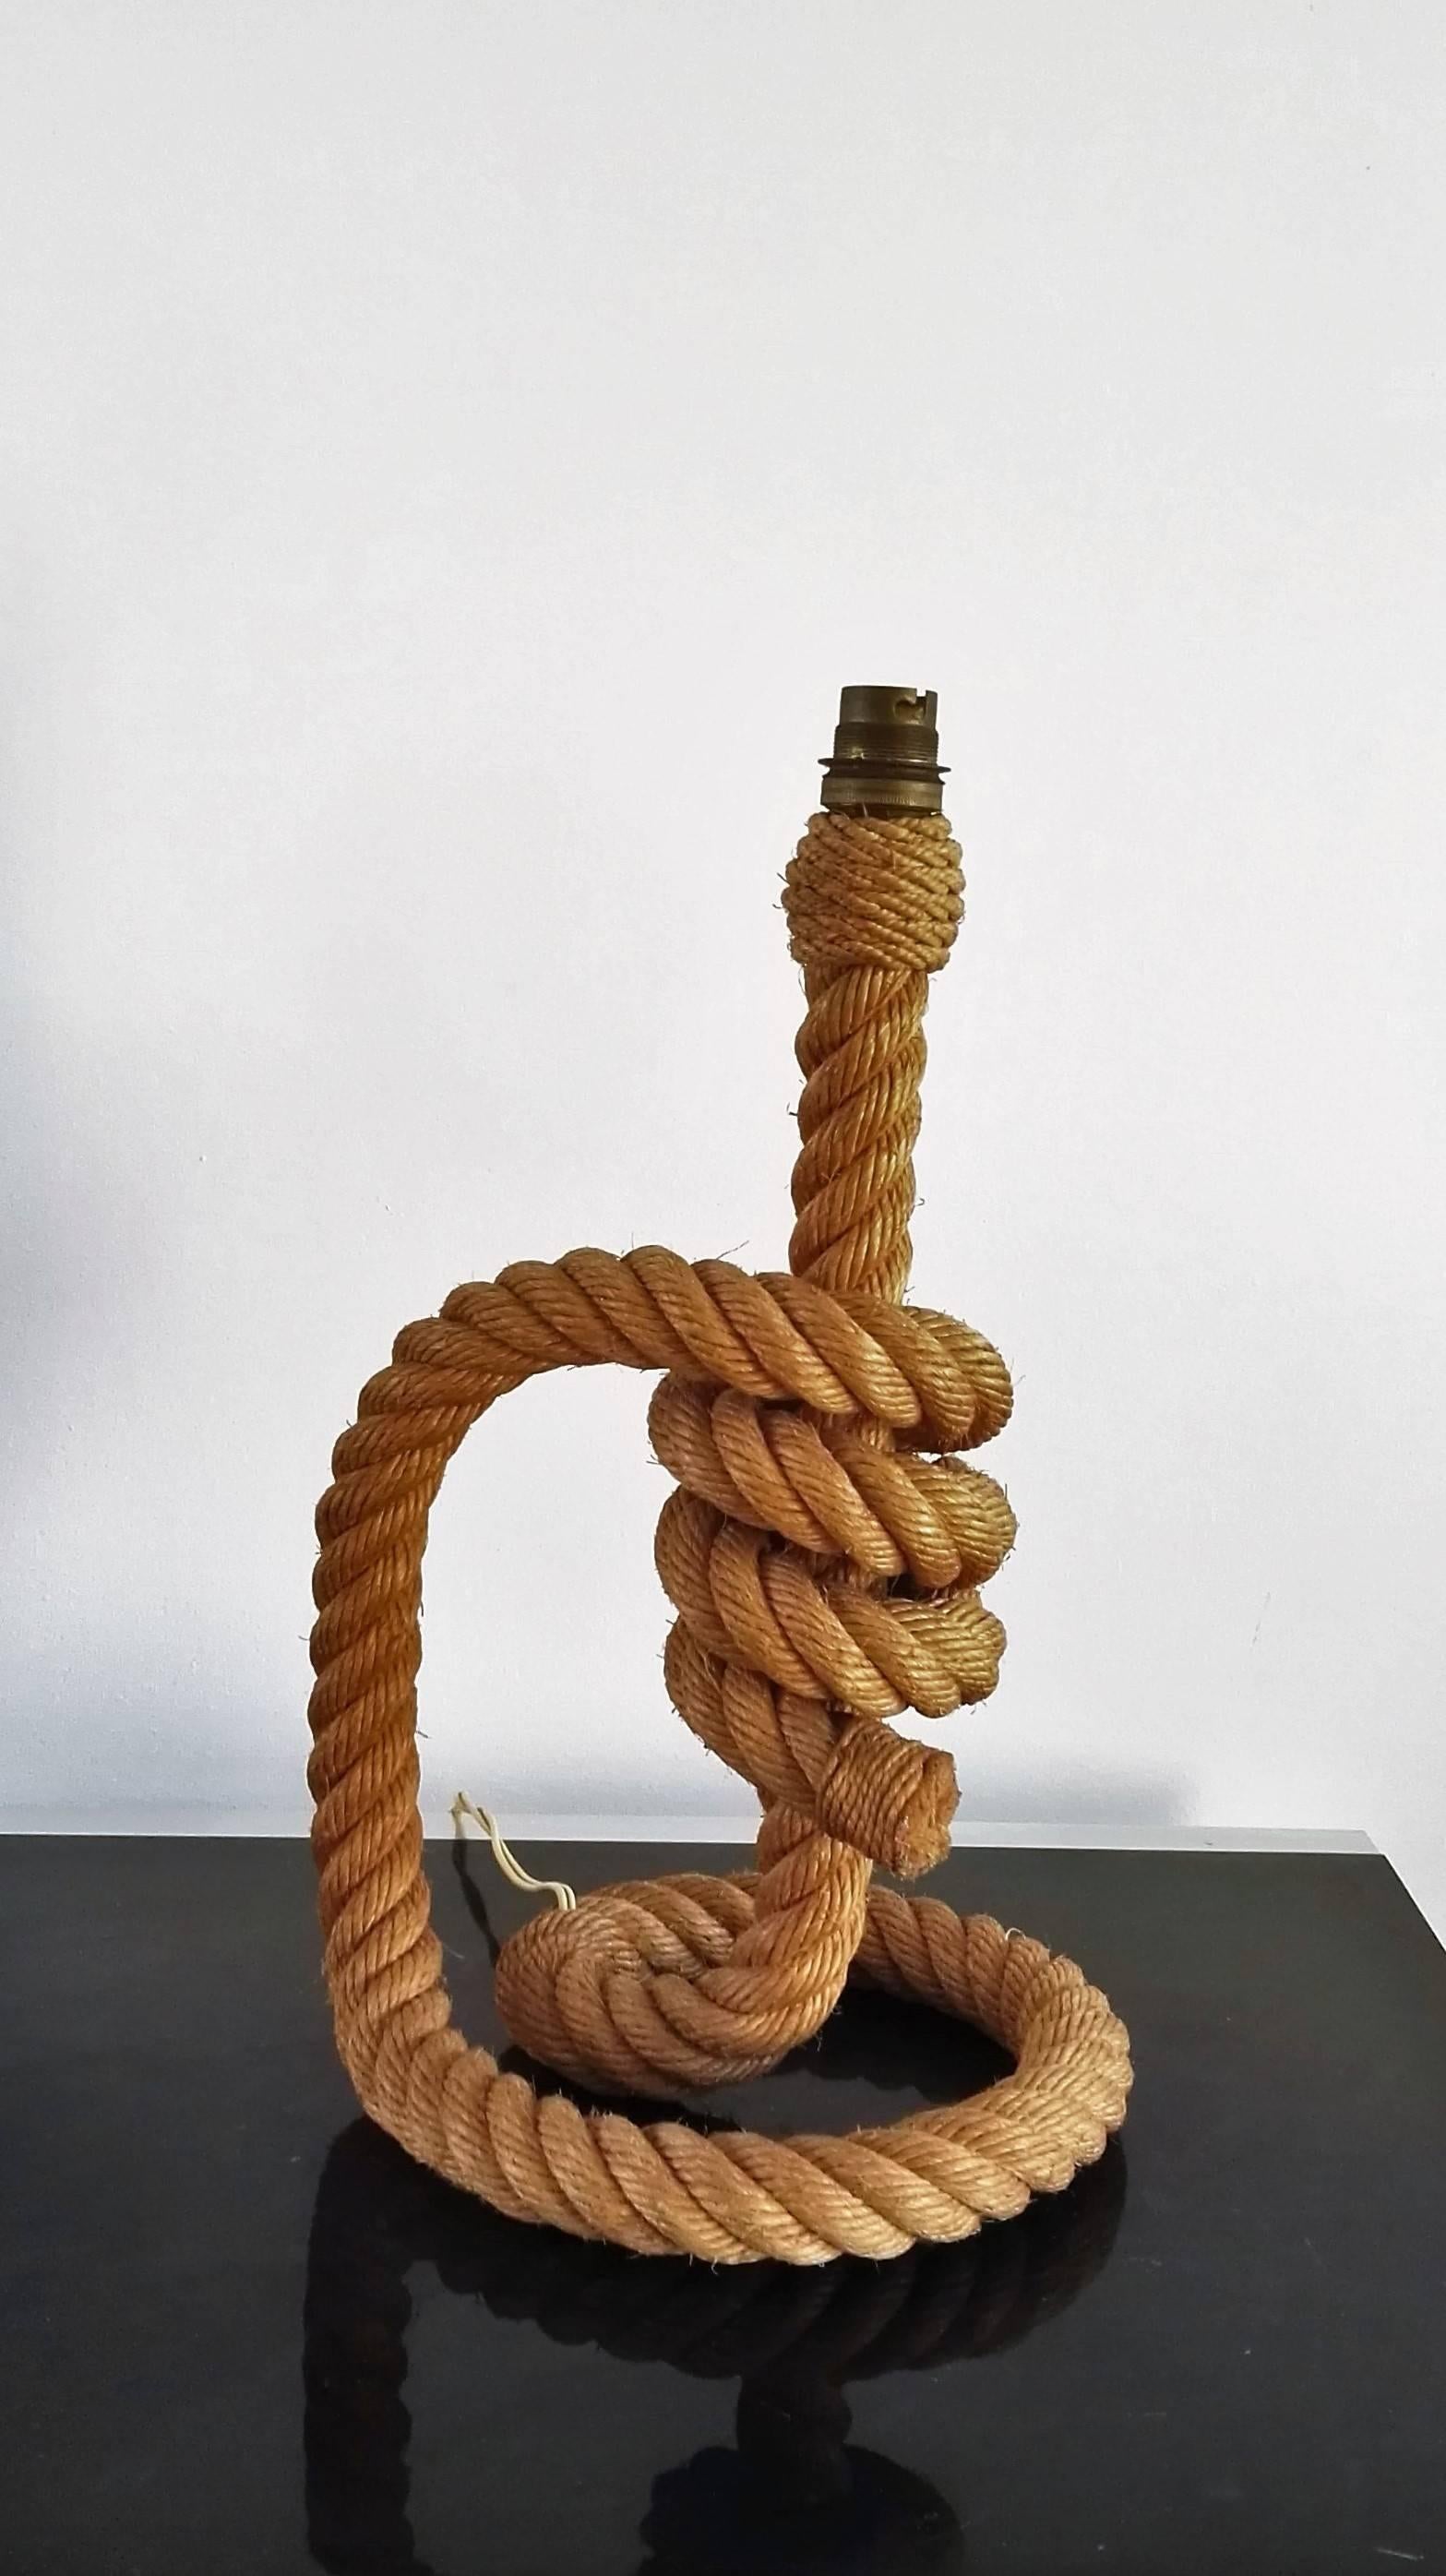 Twisted rope table lamp by Audoux Minnet.
European socket and wiring.
This sconce will ship from France.
Price does not include handling, shipping and possible applicable customs duty.
The lamp can be returned to NYDC, 200 Lexington Avenue, NY.